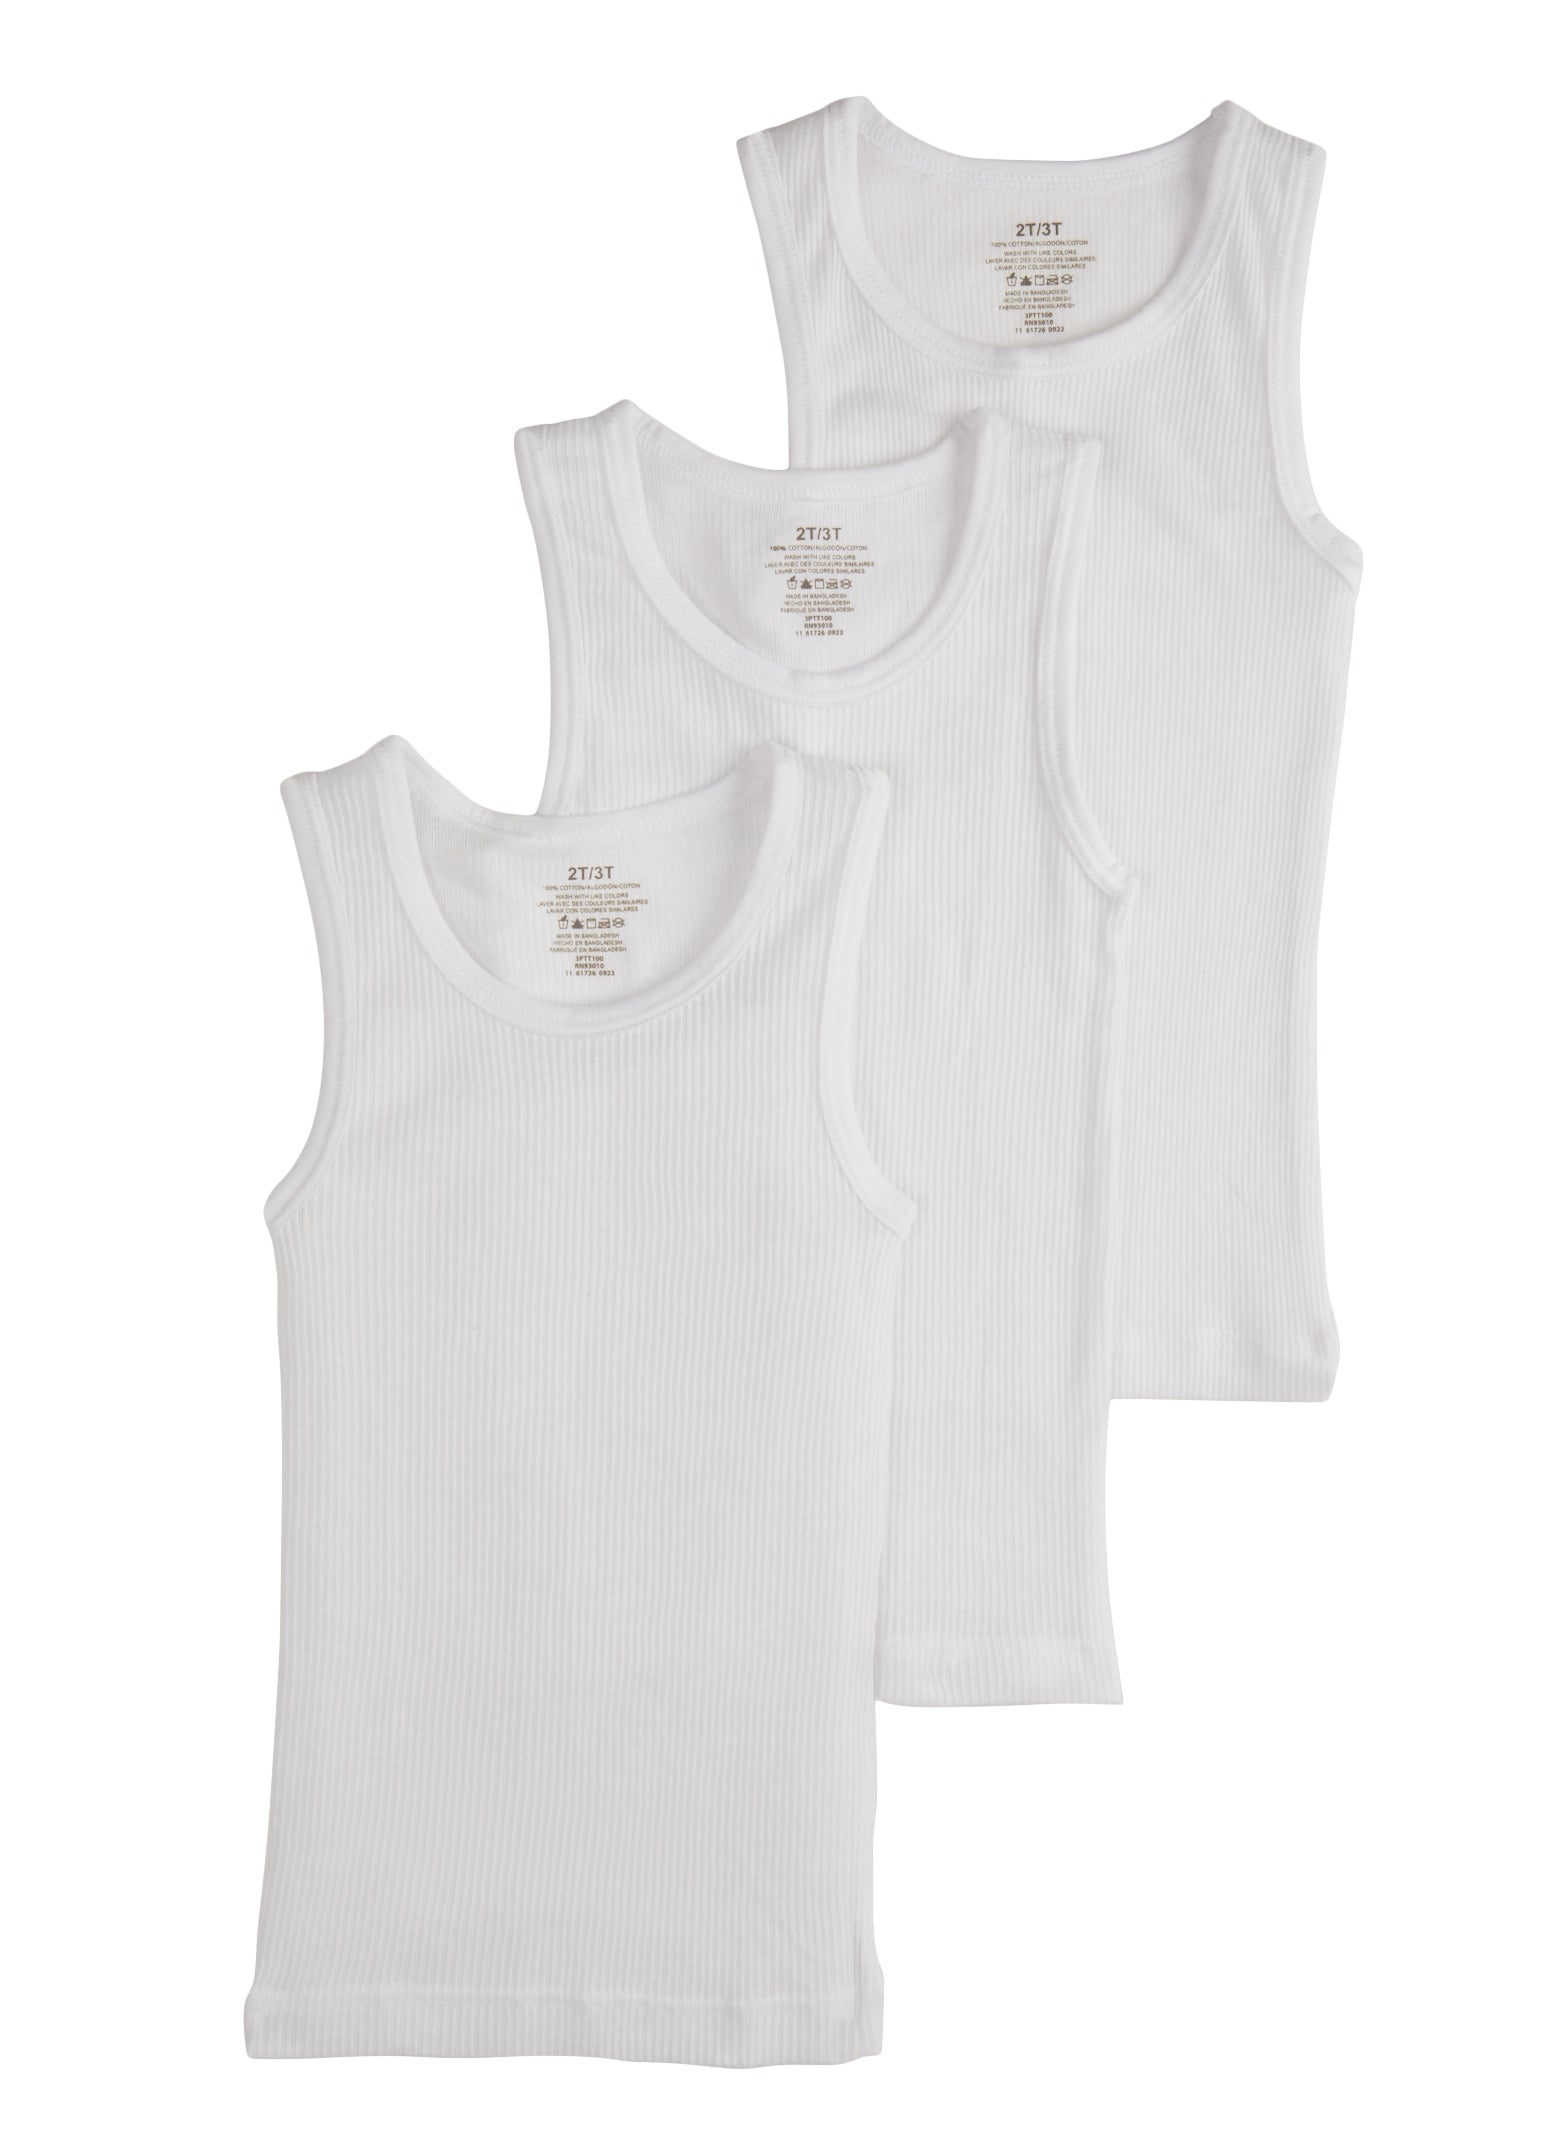 Toddler Boys Solid Ribbed Tank Tops 3 Pack, White, Size 4T